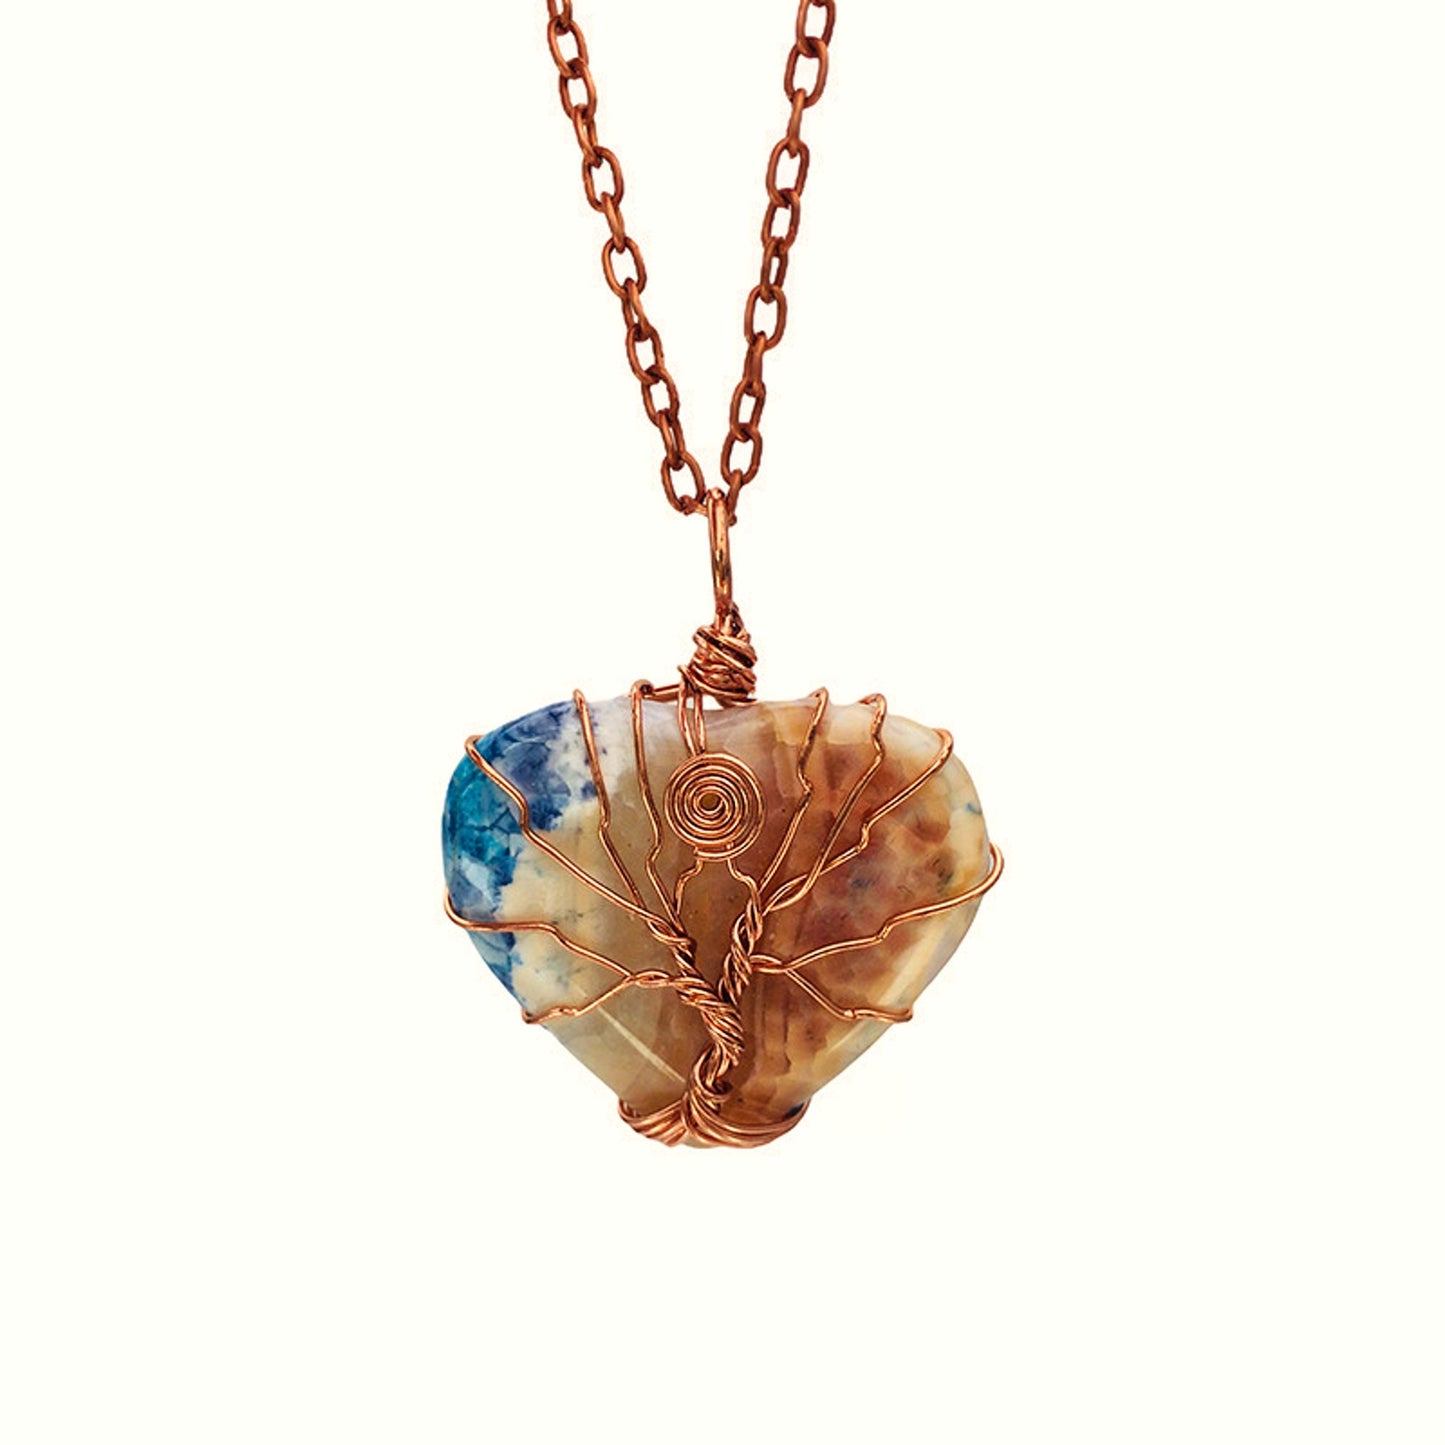 Handmade Wire Wrapped Natural Agate Heart Stone Pendant Necklace for Women - Perfect Wedding Jewelry Gift